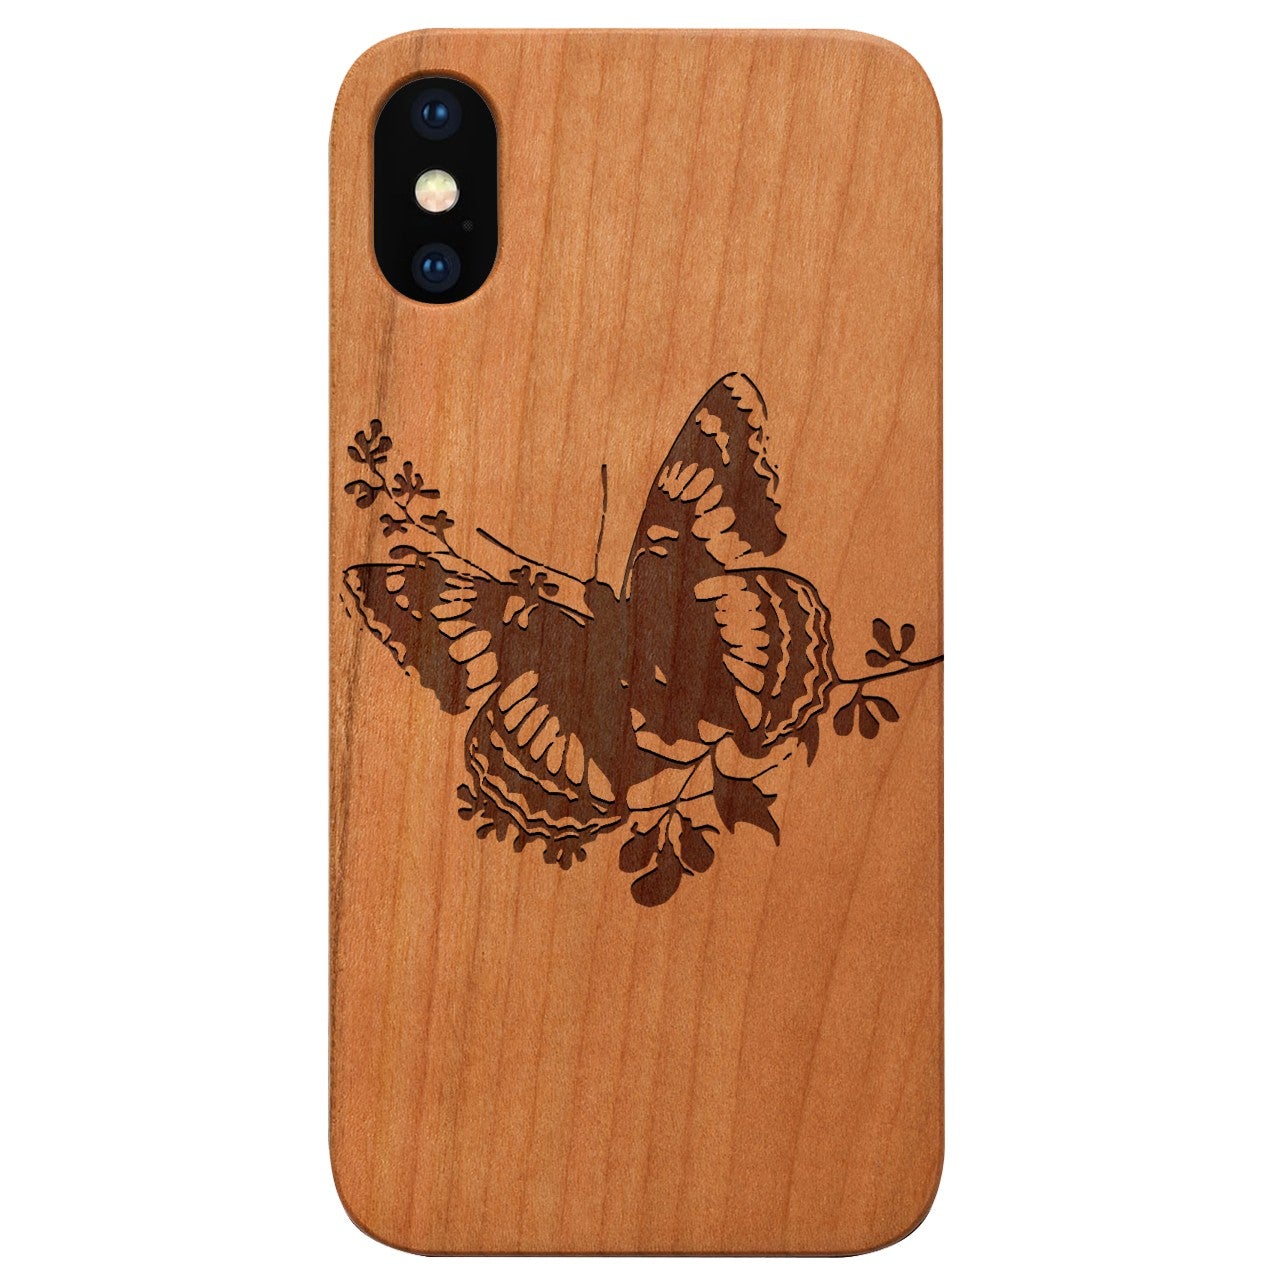  Butterfly 2 - Engraved - Wooden Phone Case - IPhone 13 Models